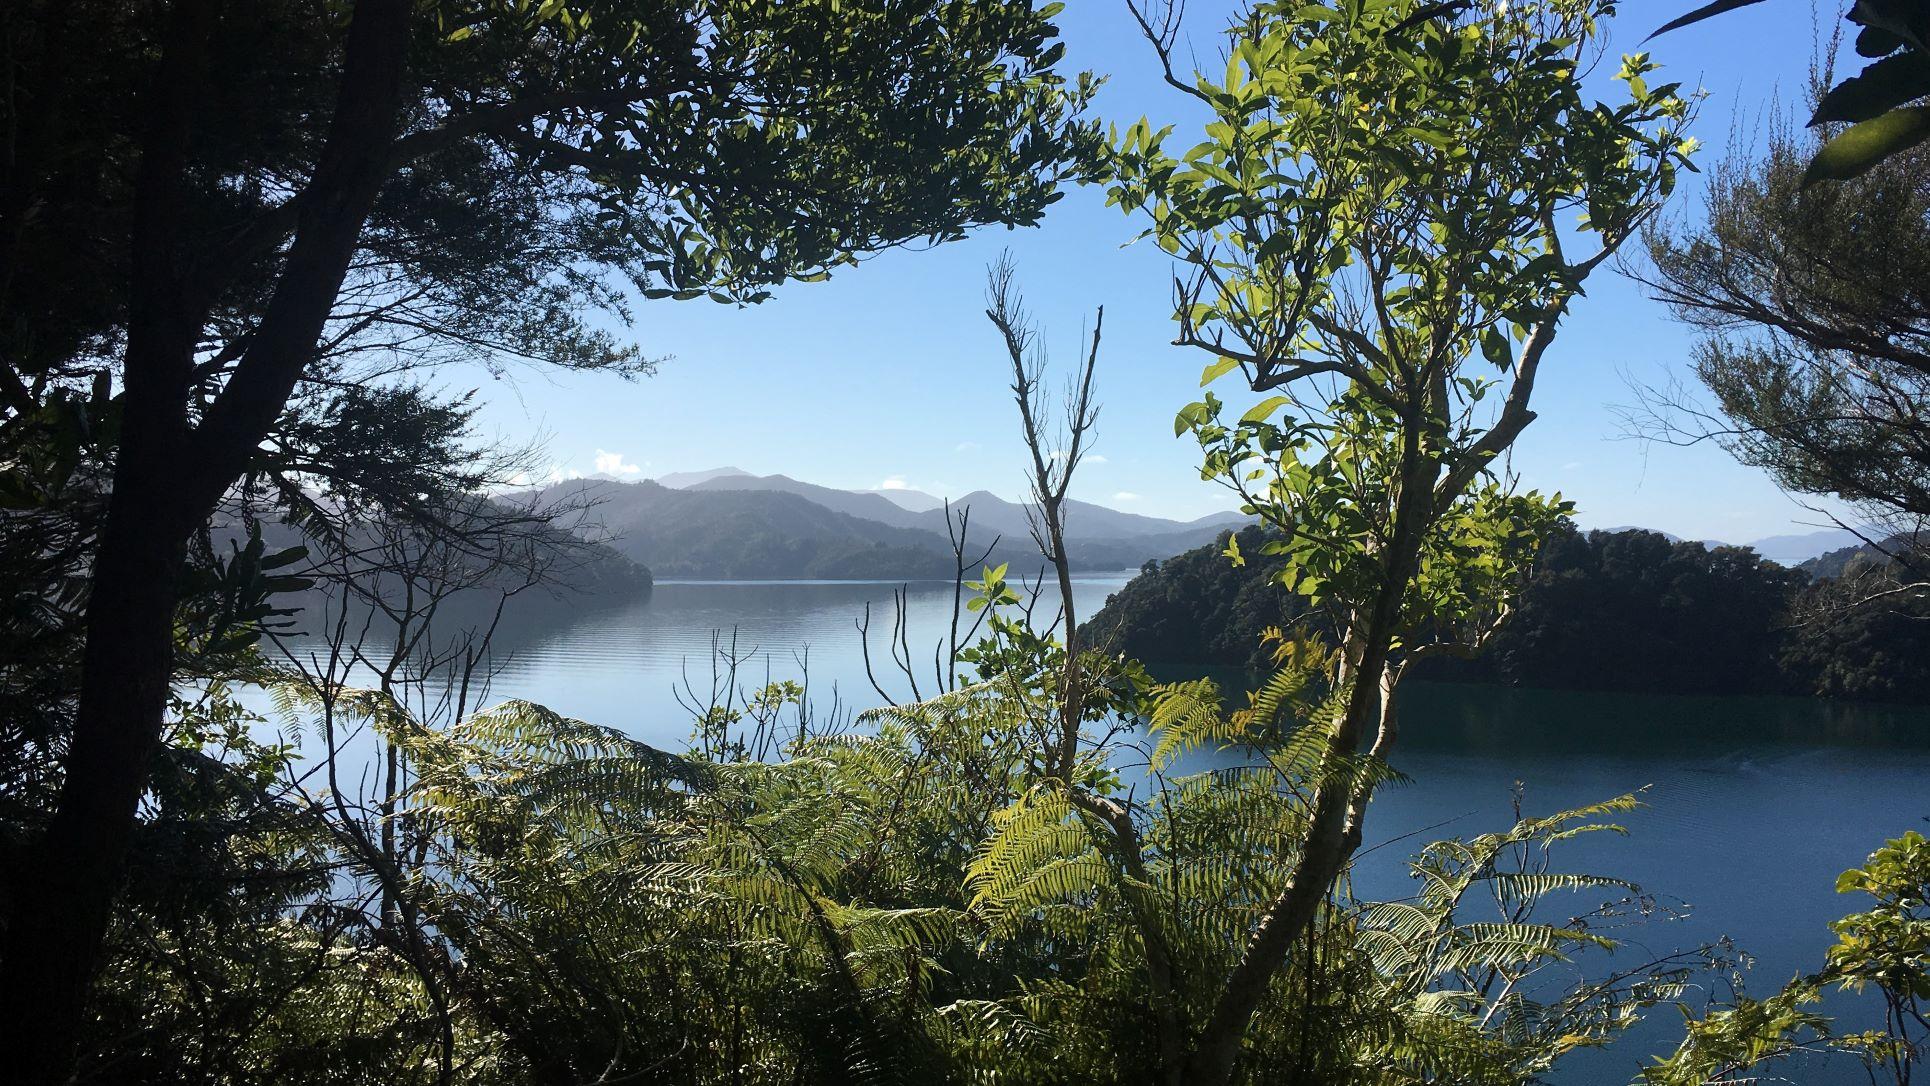 Queen Charlotte Track - Best Luxury Hikes in Australia and New Zealand